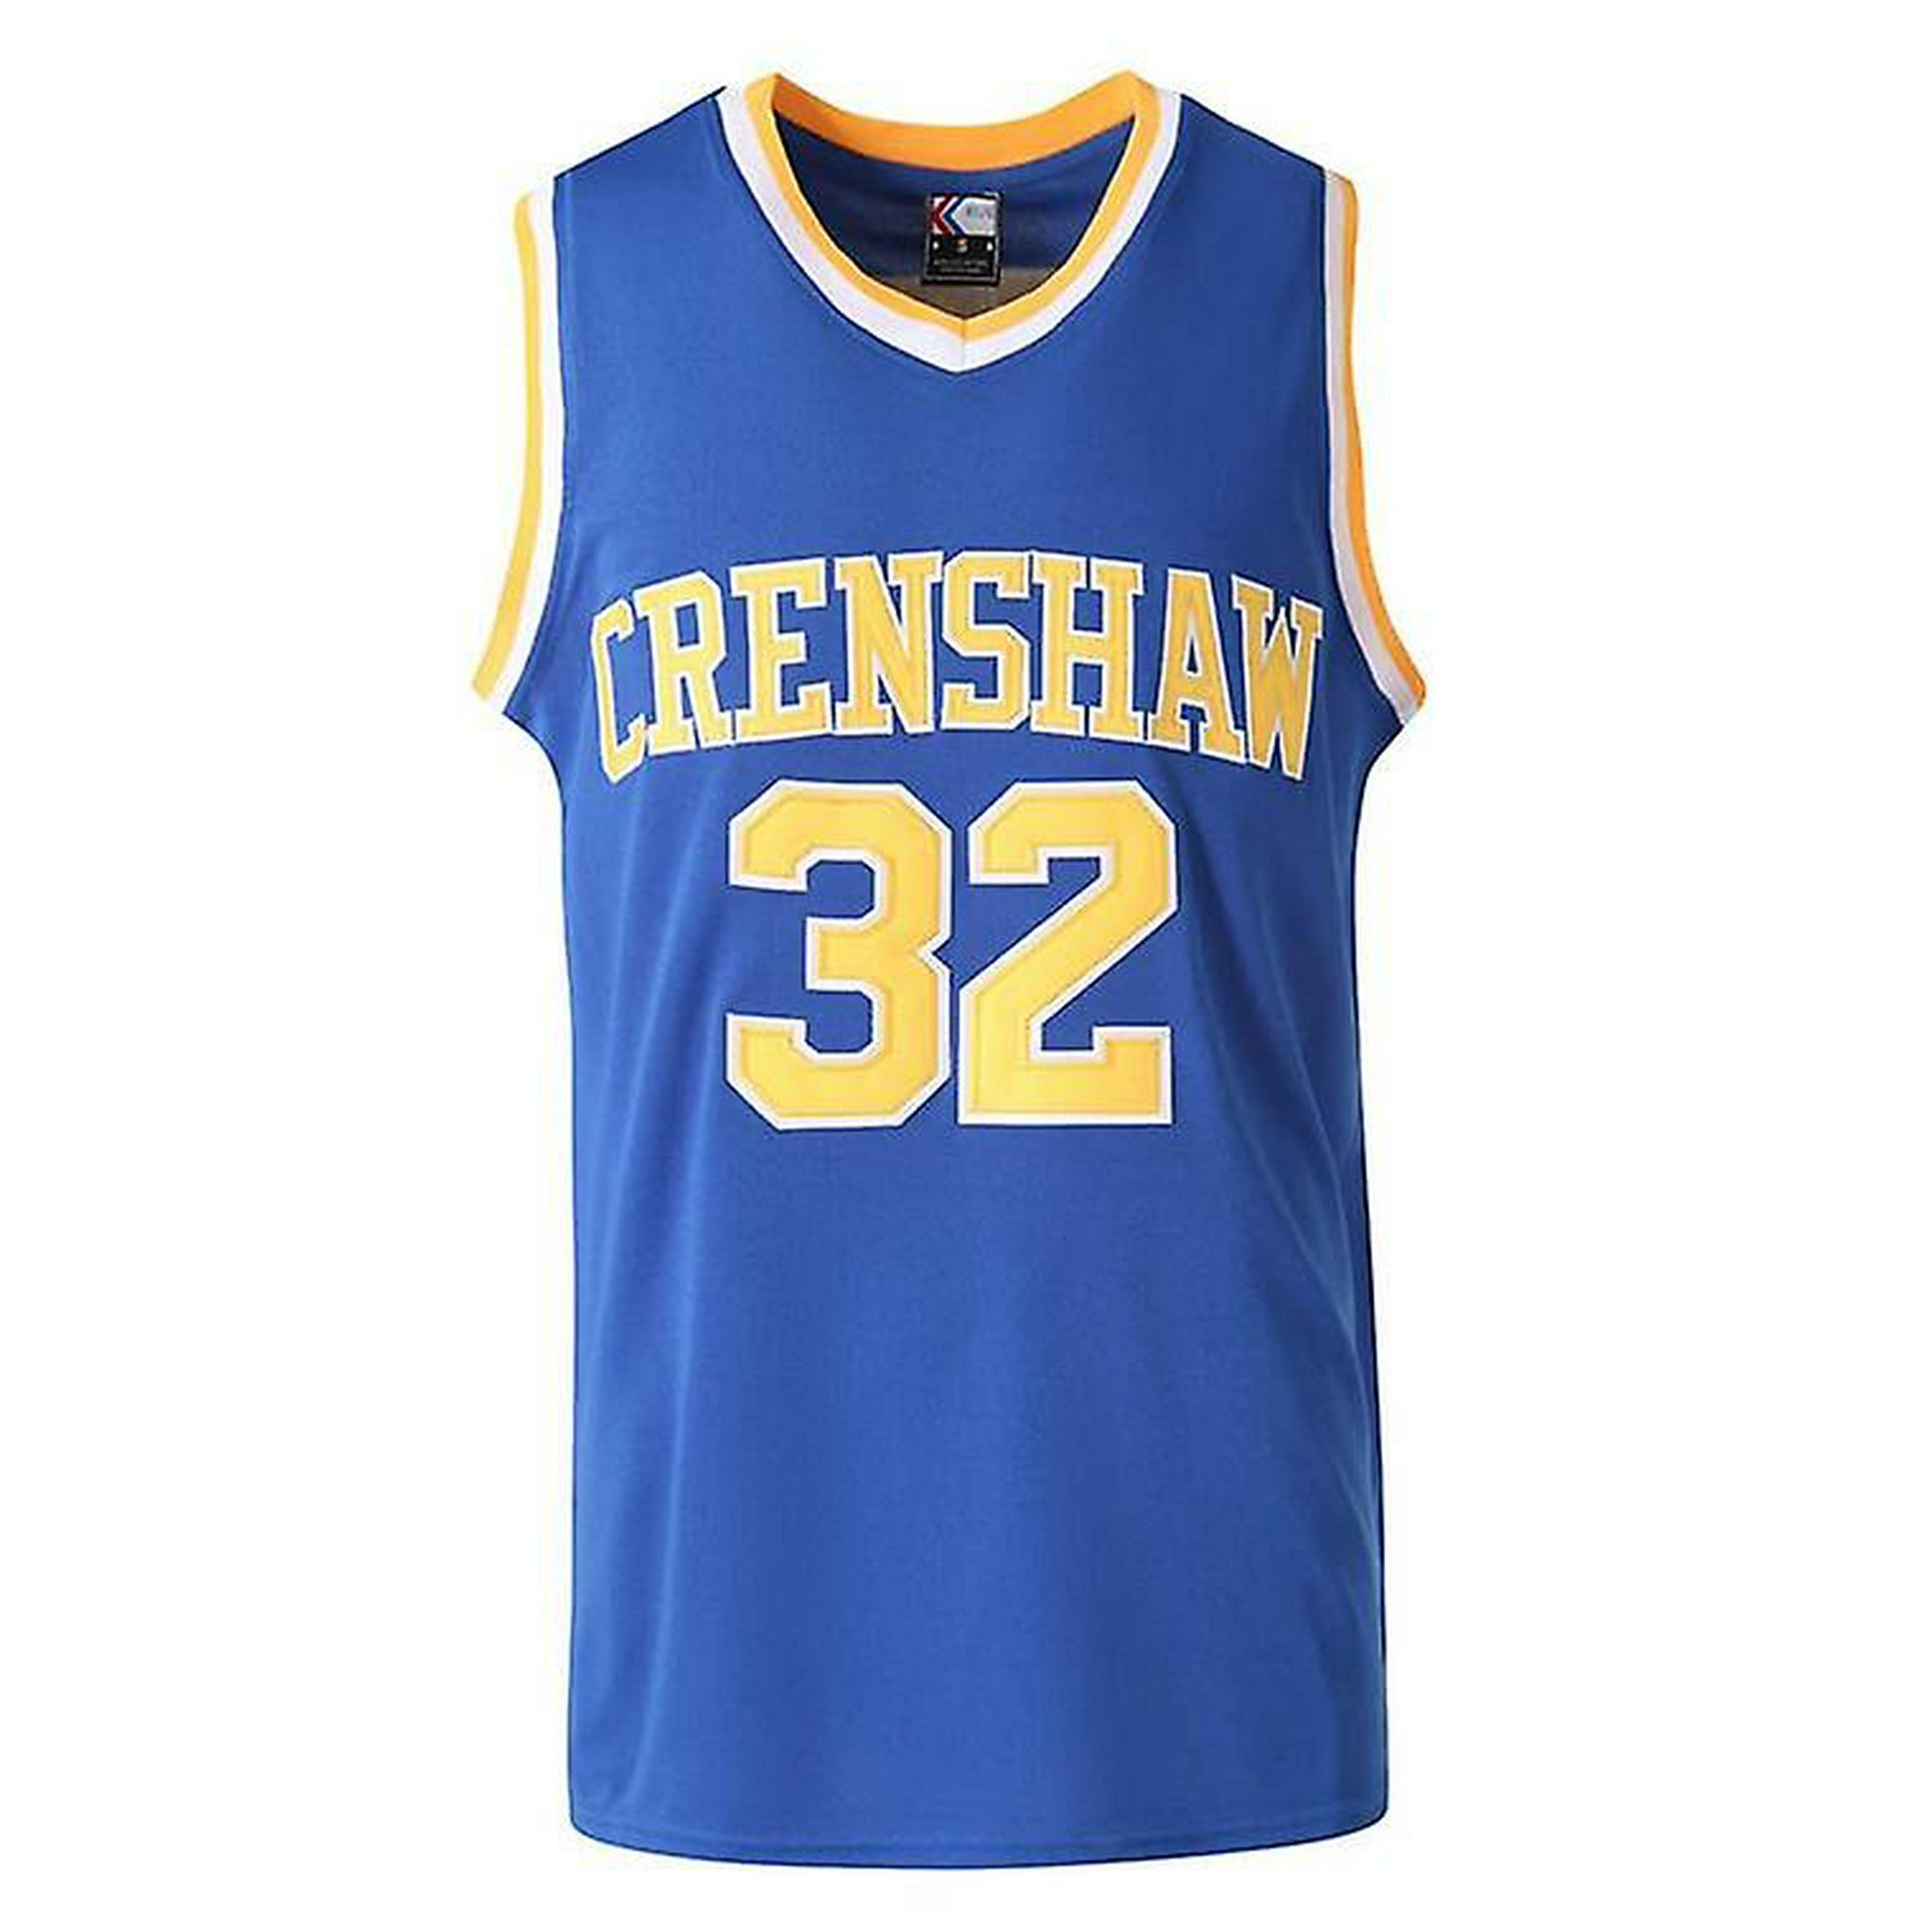 Hefei Mccall #22 Wright #32 Crenshaw Jersey, Throwback Basketball Jersey, Love And Basketball Jersey, 90s Jersey Other L 50